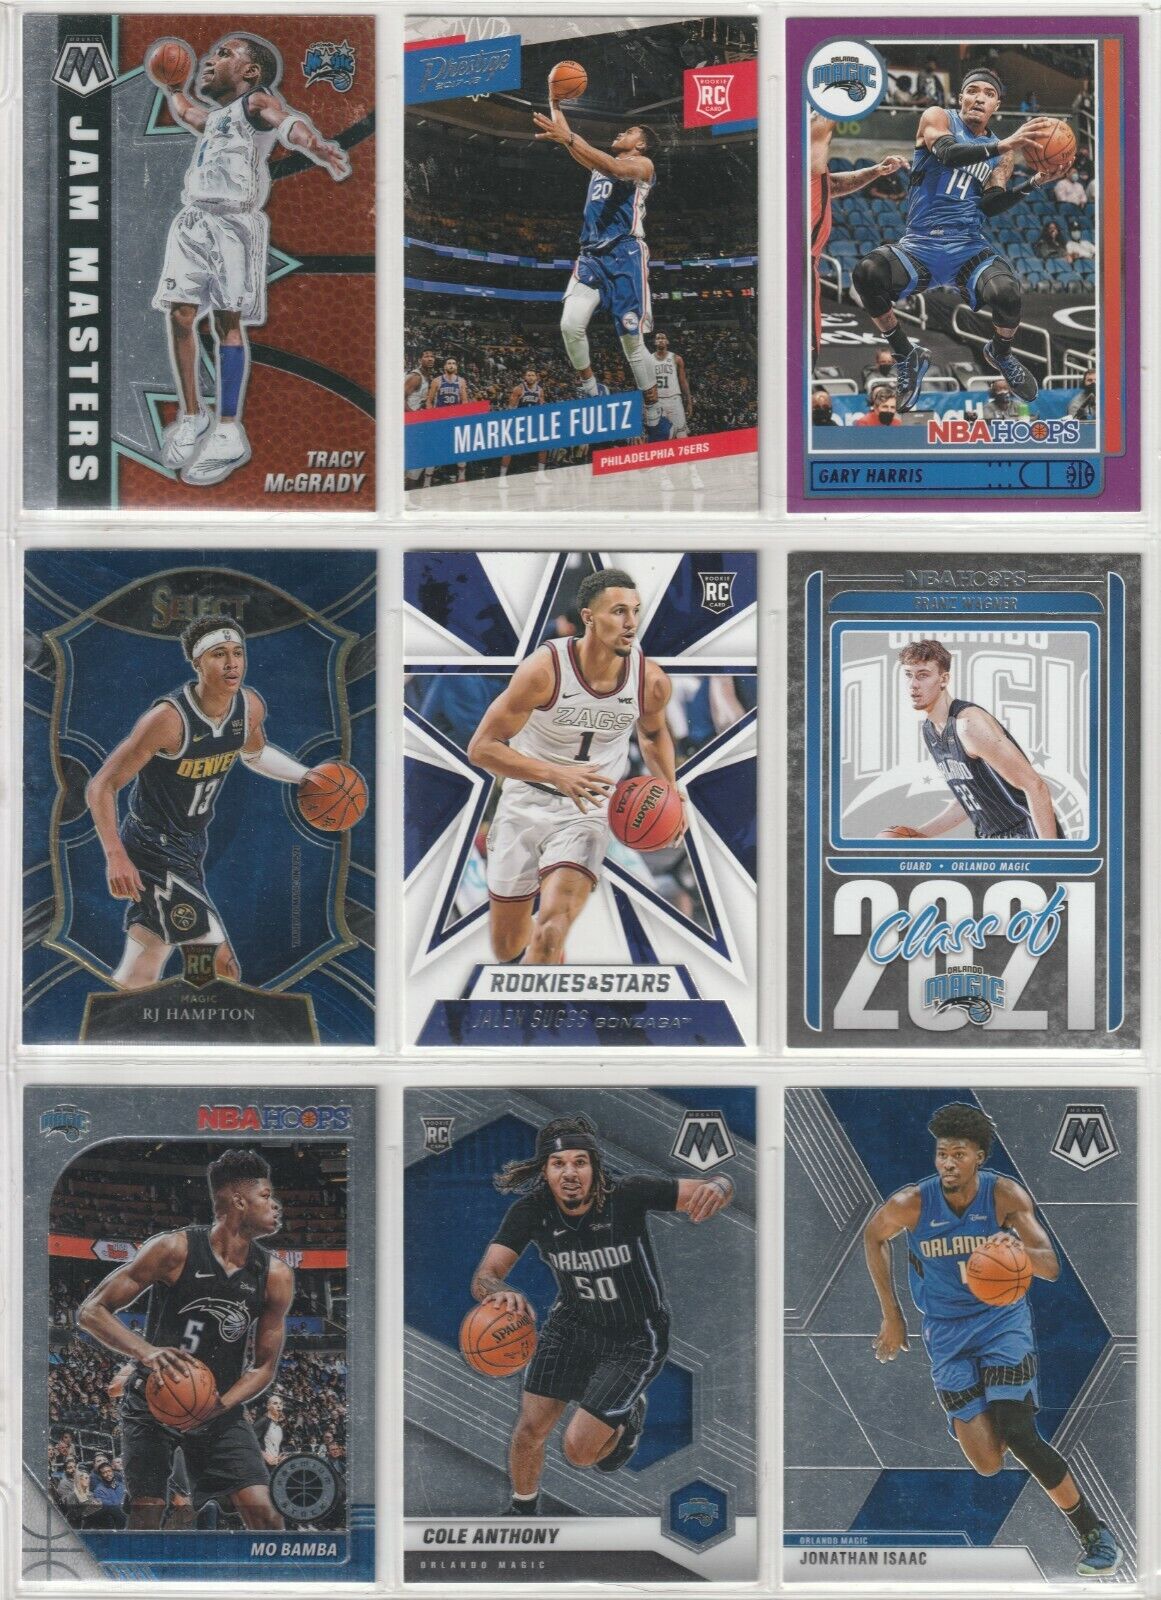 Orlando Magic Rookie Basketball Card Lot - Bamba, Isaac, Anthony, Carter, more. rookie card picture